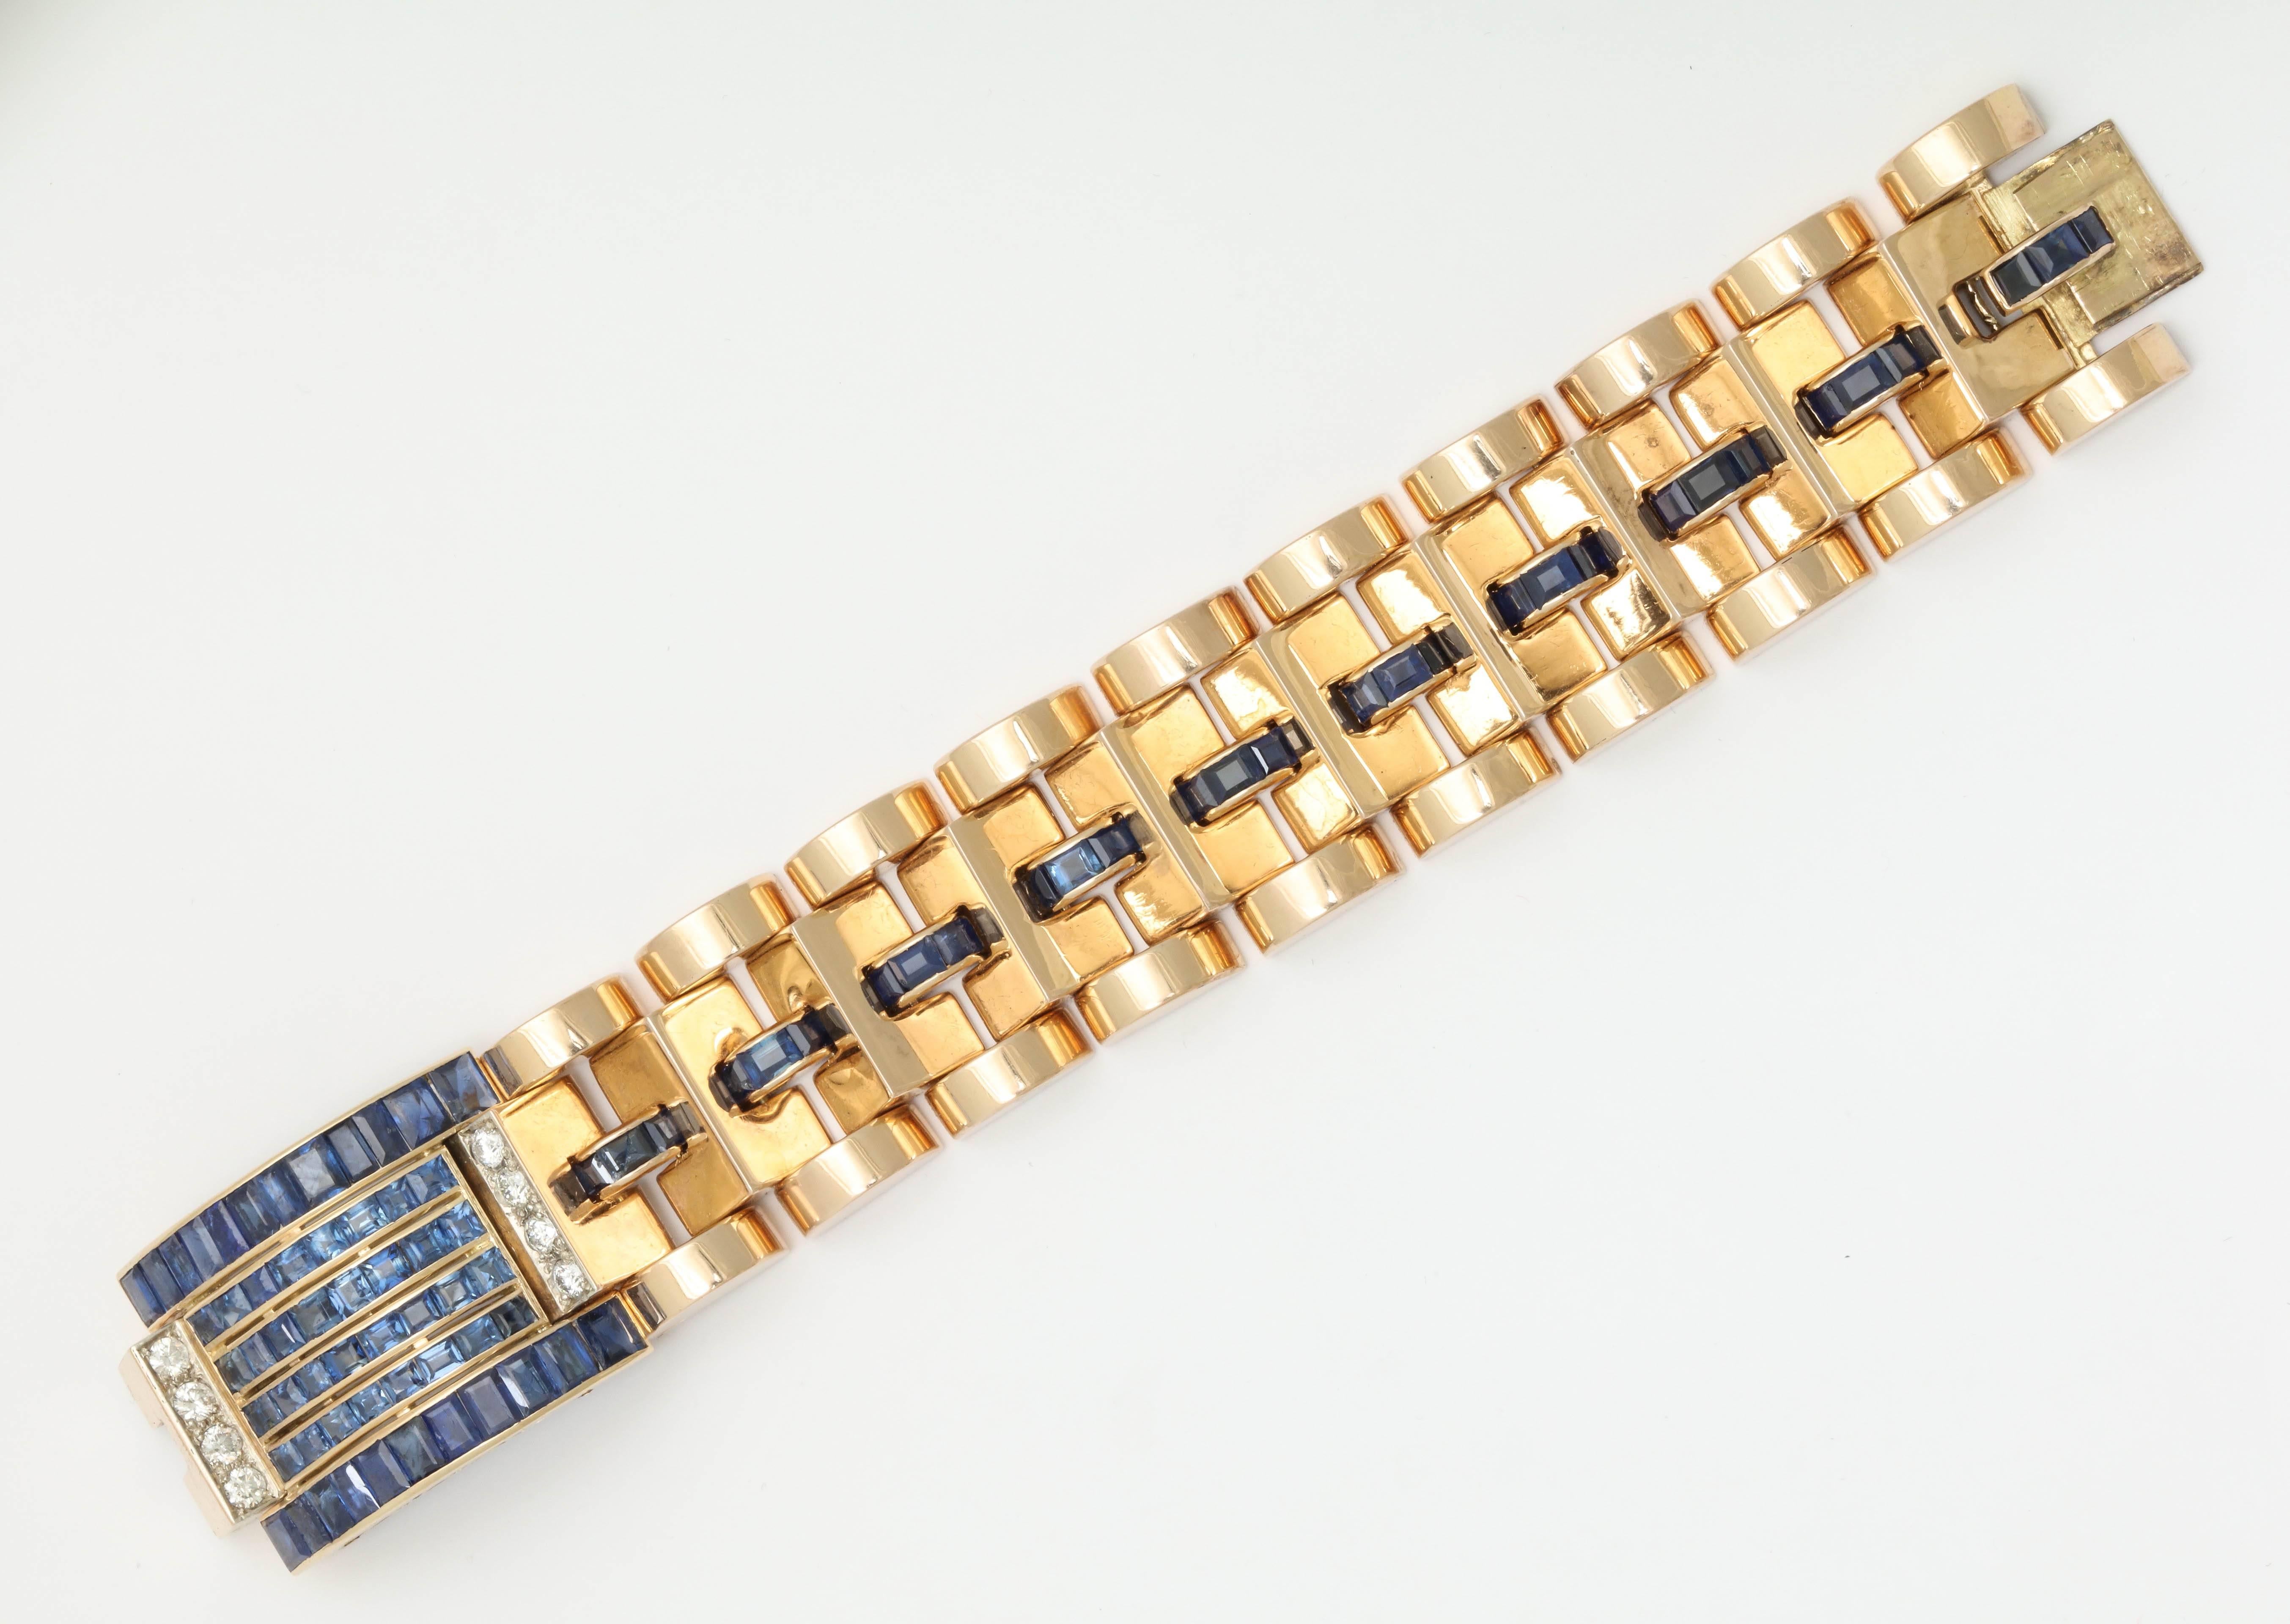 14kt Rose Gold Flexible Link Bracelet Embellished with numerous beautiful color custom cut calibrated Sapphires And Further Designed With 8 full cut diamonds weighing approximately 1.50 cts and weight of Sapphires weighing approximately 10 carats.